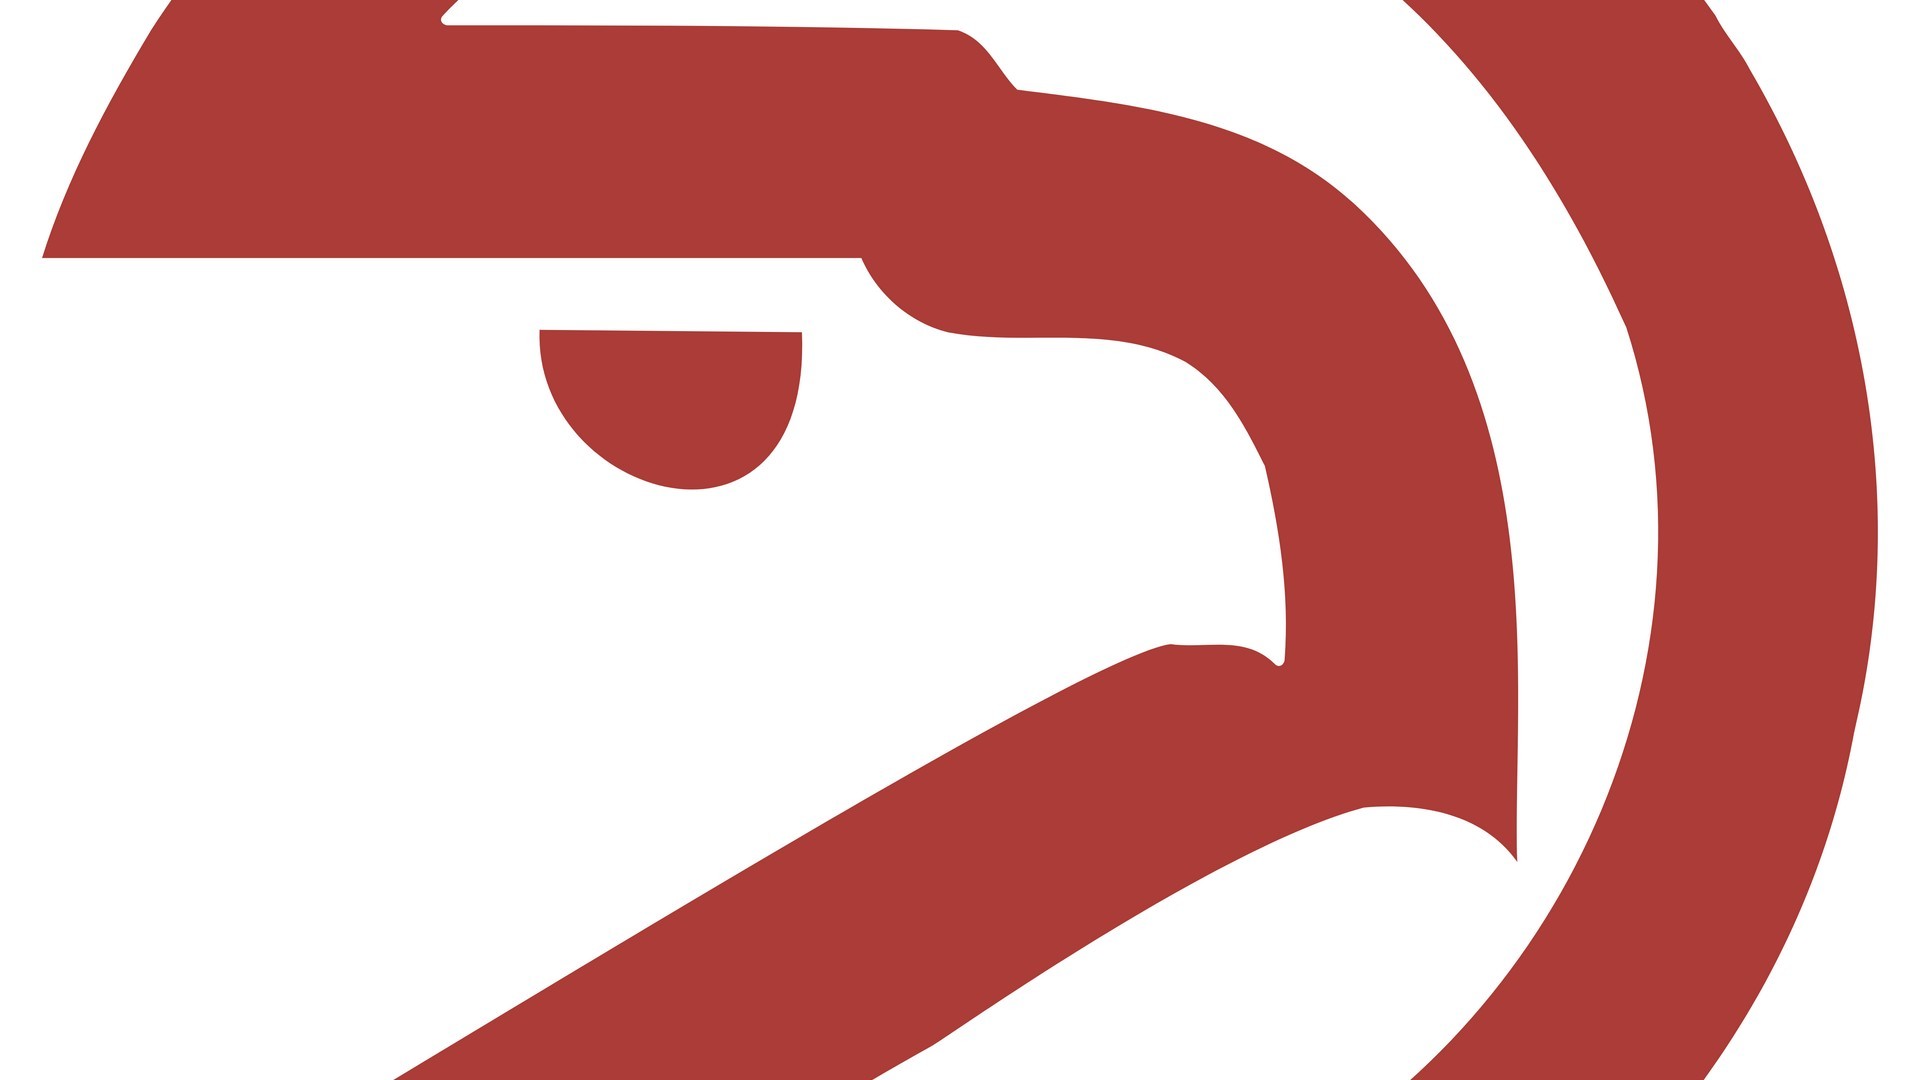 1920x1080 Atlanta Hawks Desktop Wallpapers with image dimensions  pixel. You  can make this wallpaper for